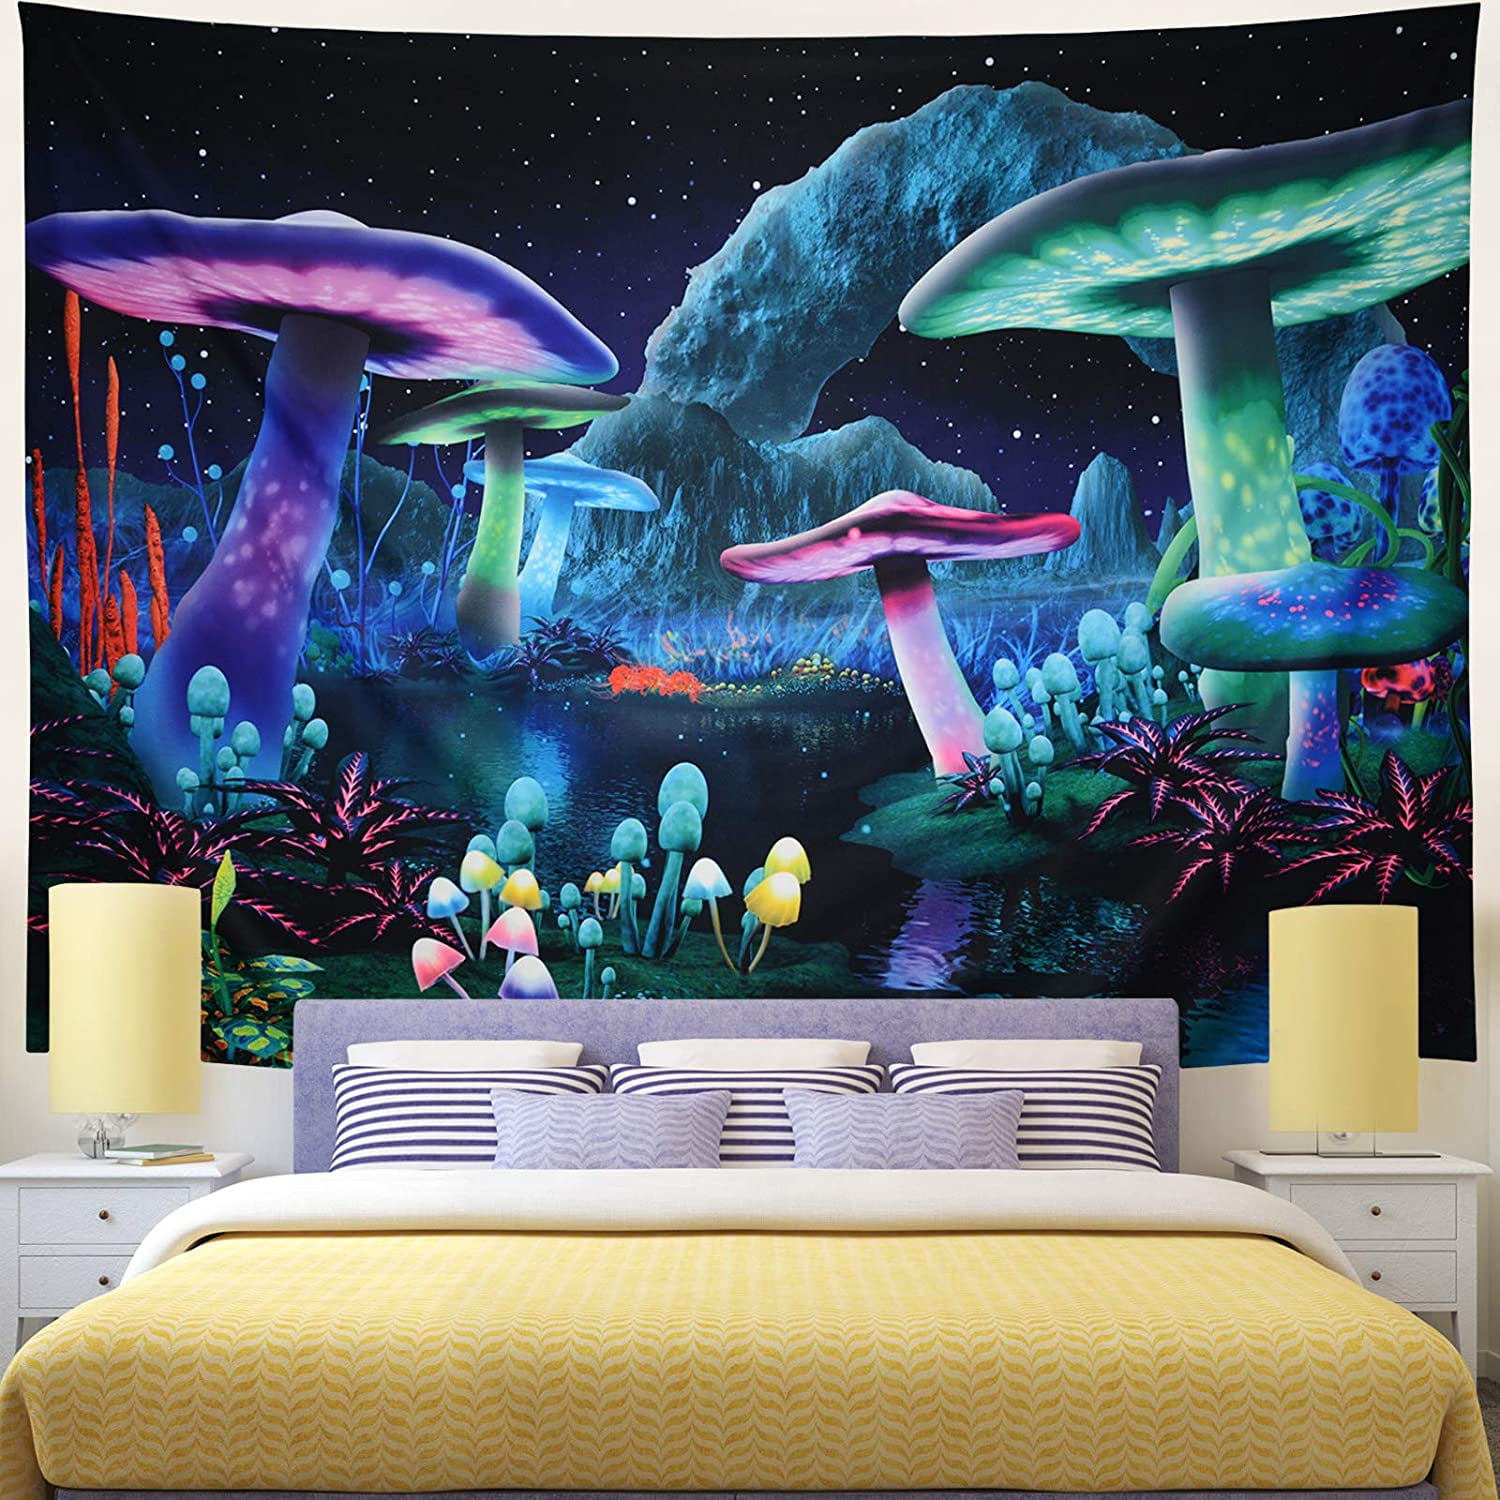 Psychedelic Music Tapestry Art Wall Hanging Sofa Table Bed Cover Poster 